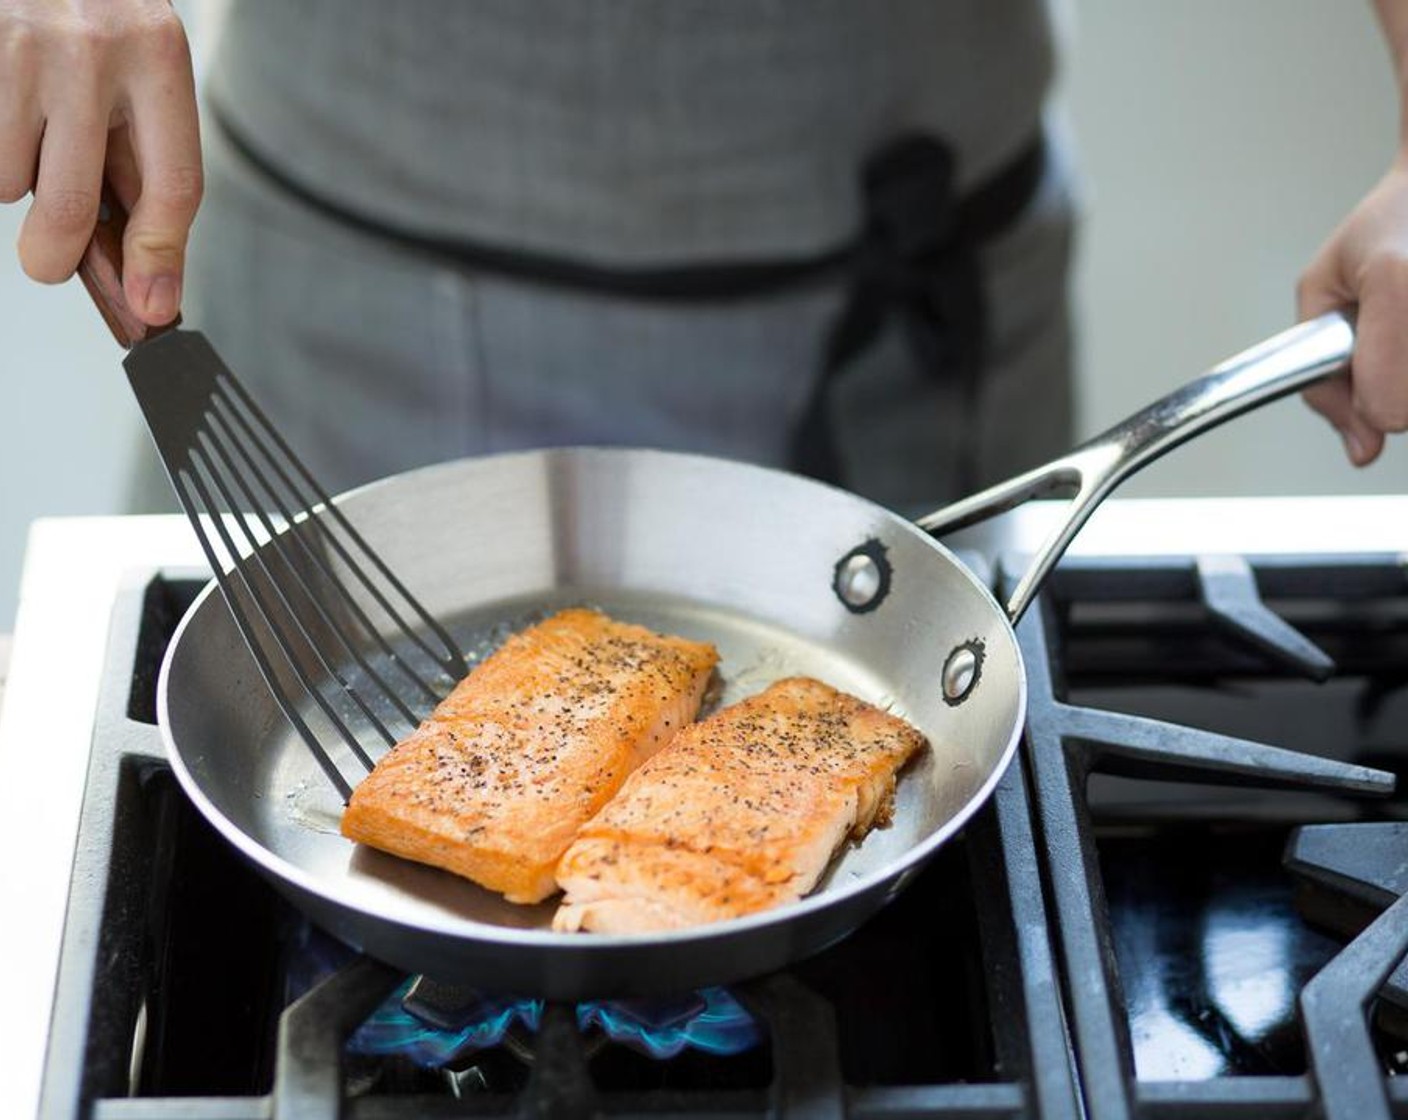 step 6 Heat another medium sauté pan over medium-high heat and add Olive Oil (1 Tbsp). When the oil is hot, place the salmon fillets into the hot pan and sear for 3 minutes on each side; until crispy and cooked through. Remove from heat and set aside for plating.